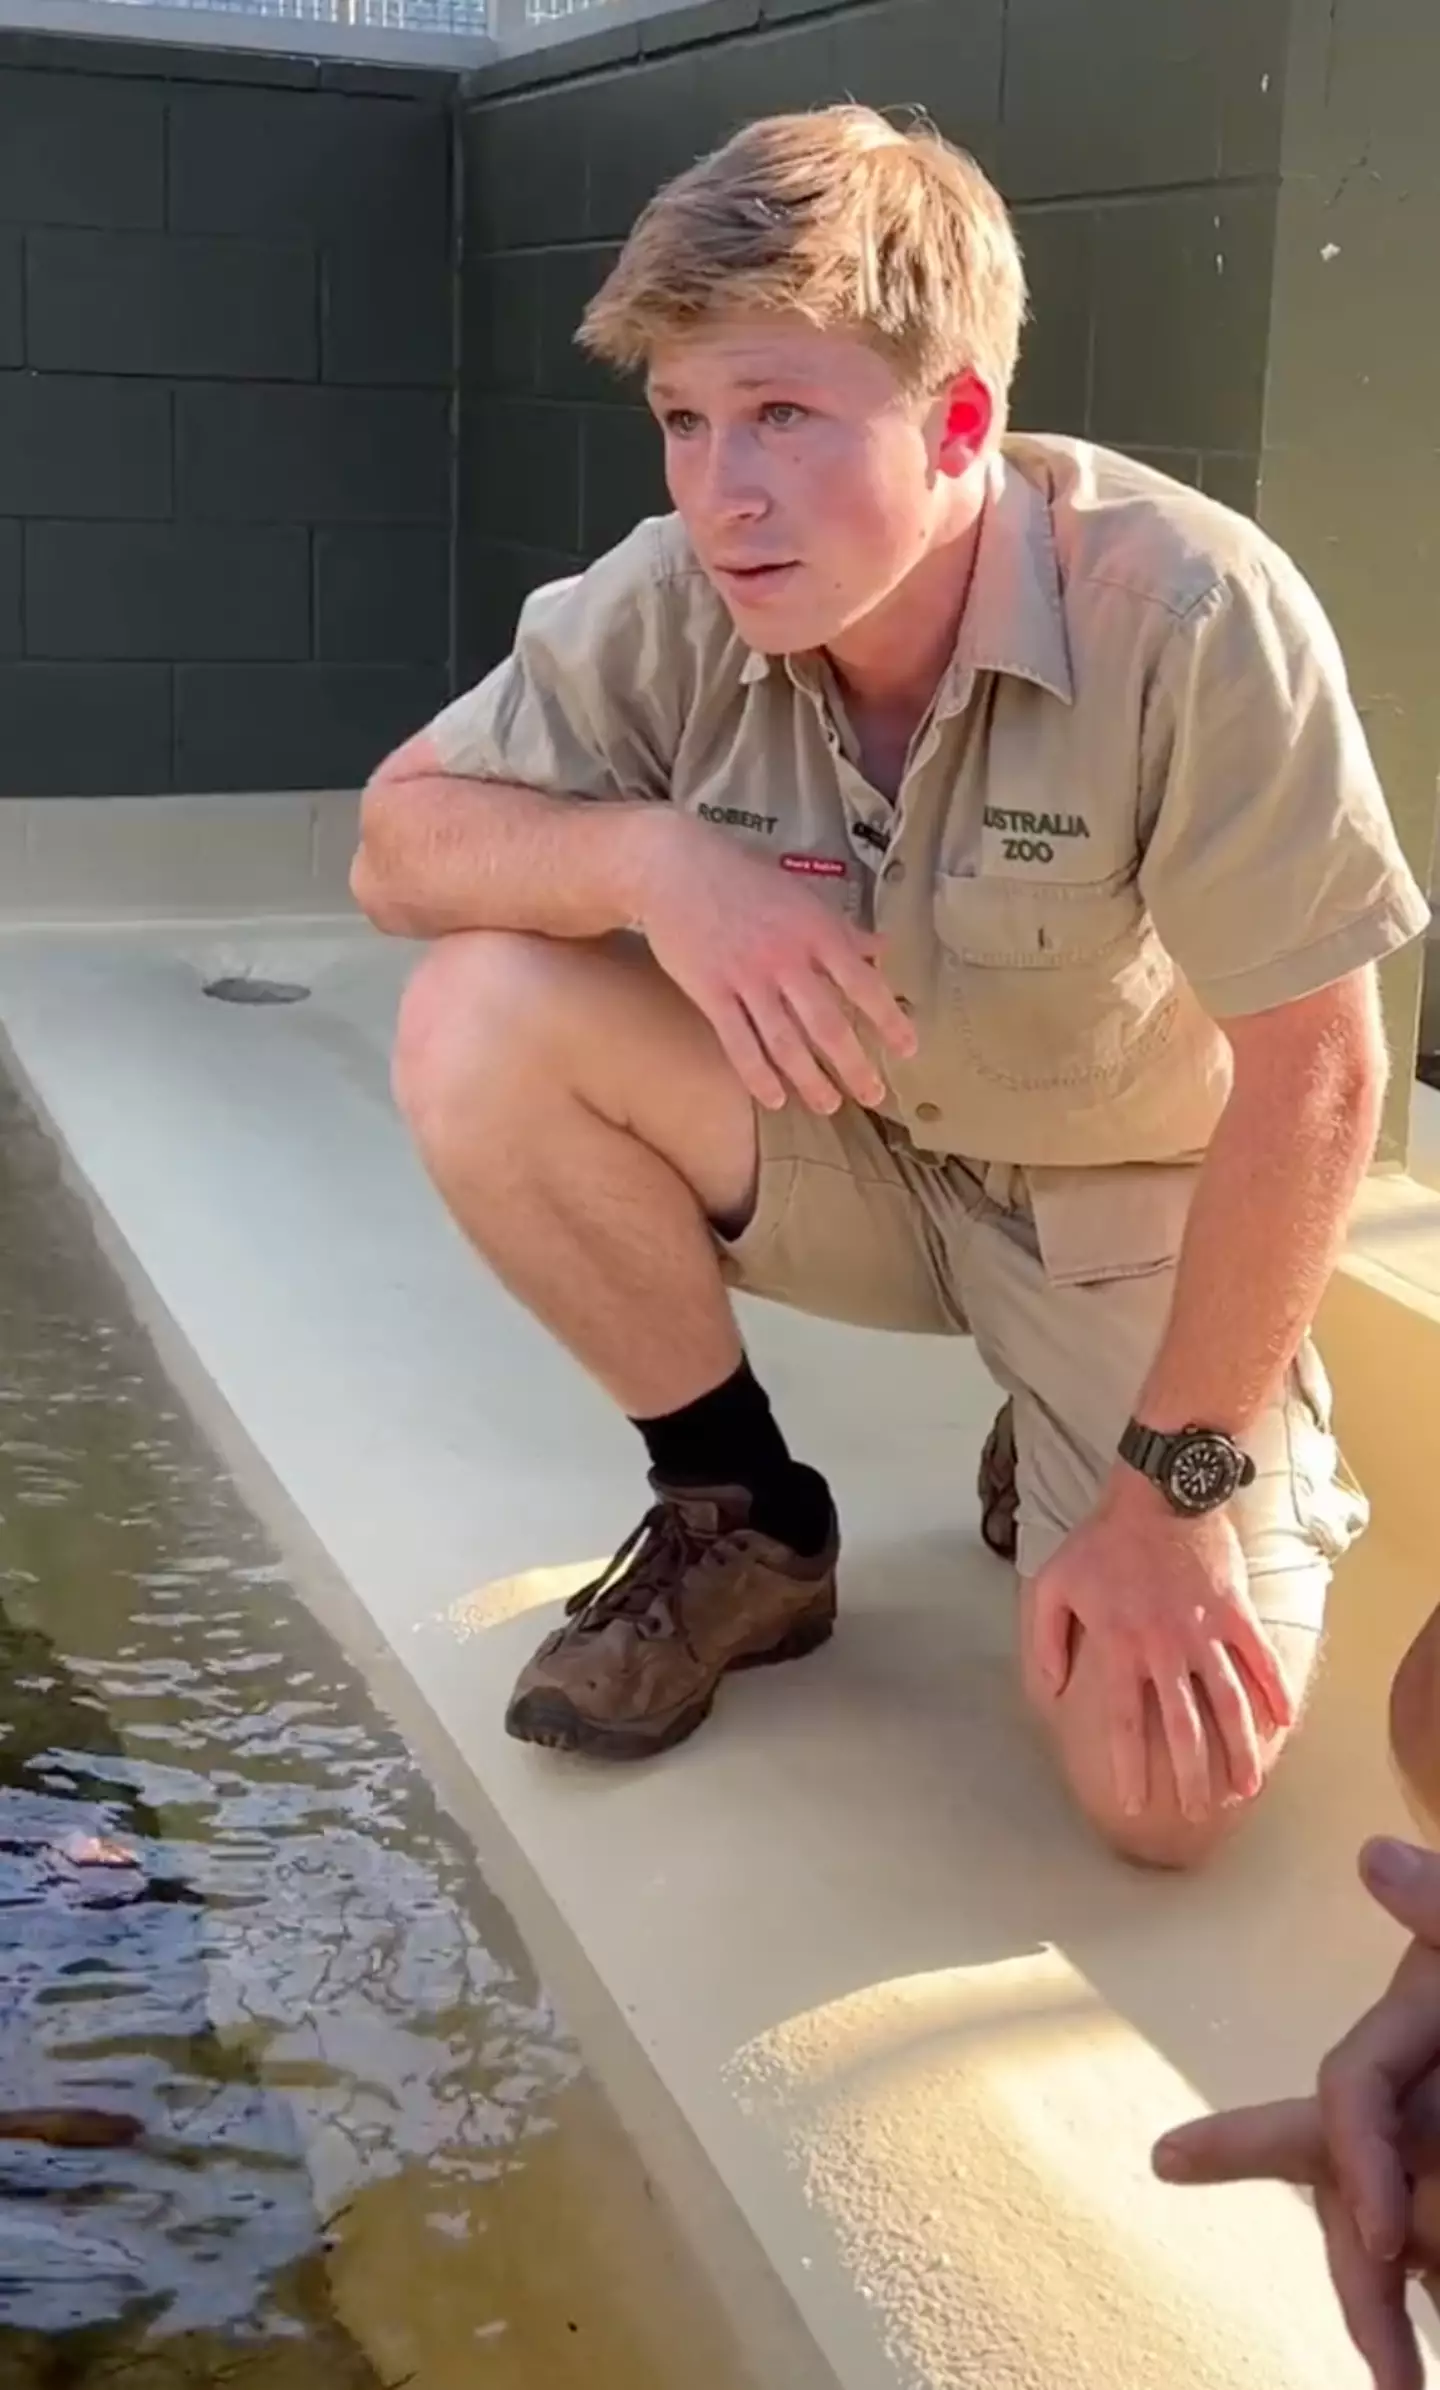 The young zookeeper became emotional during the video.